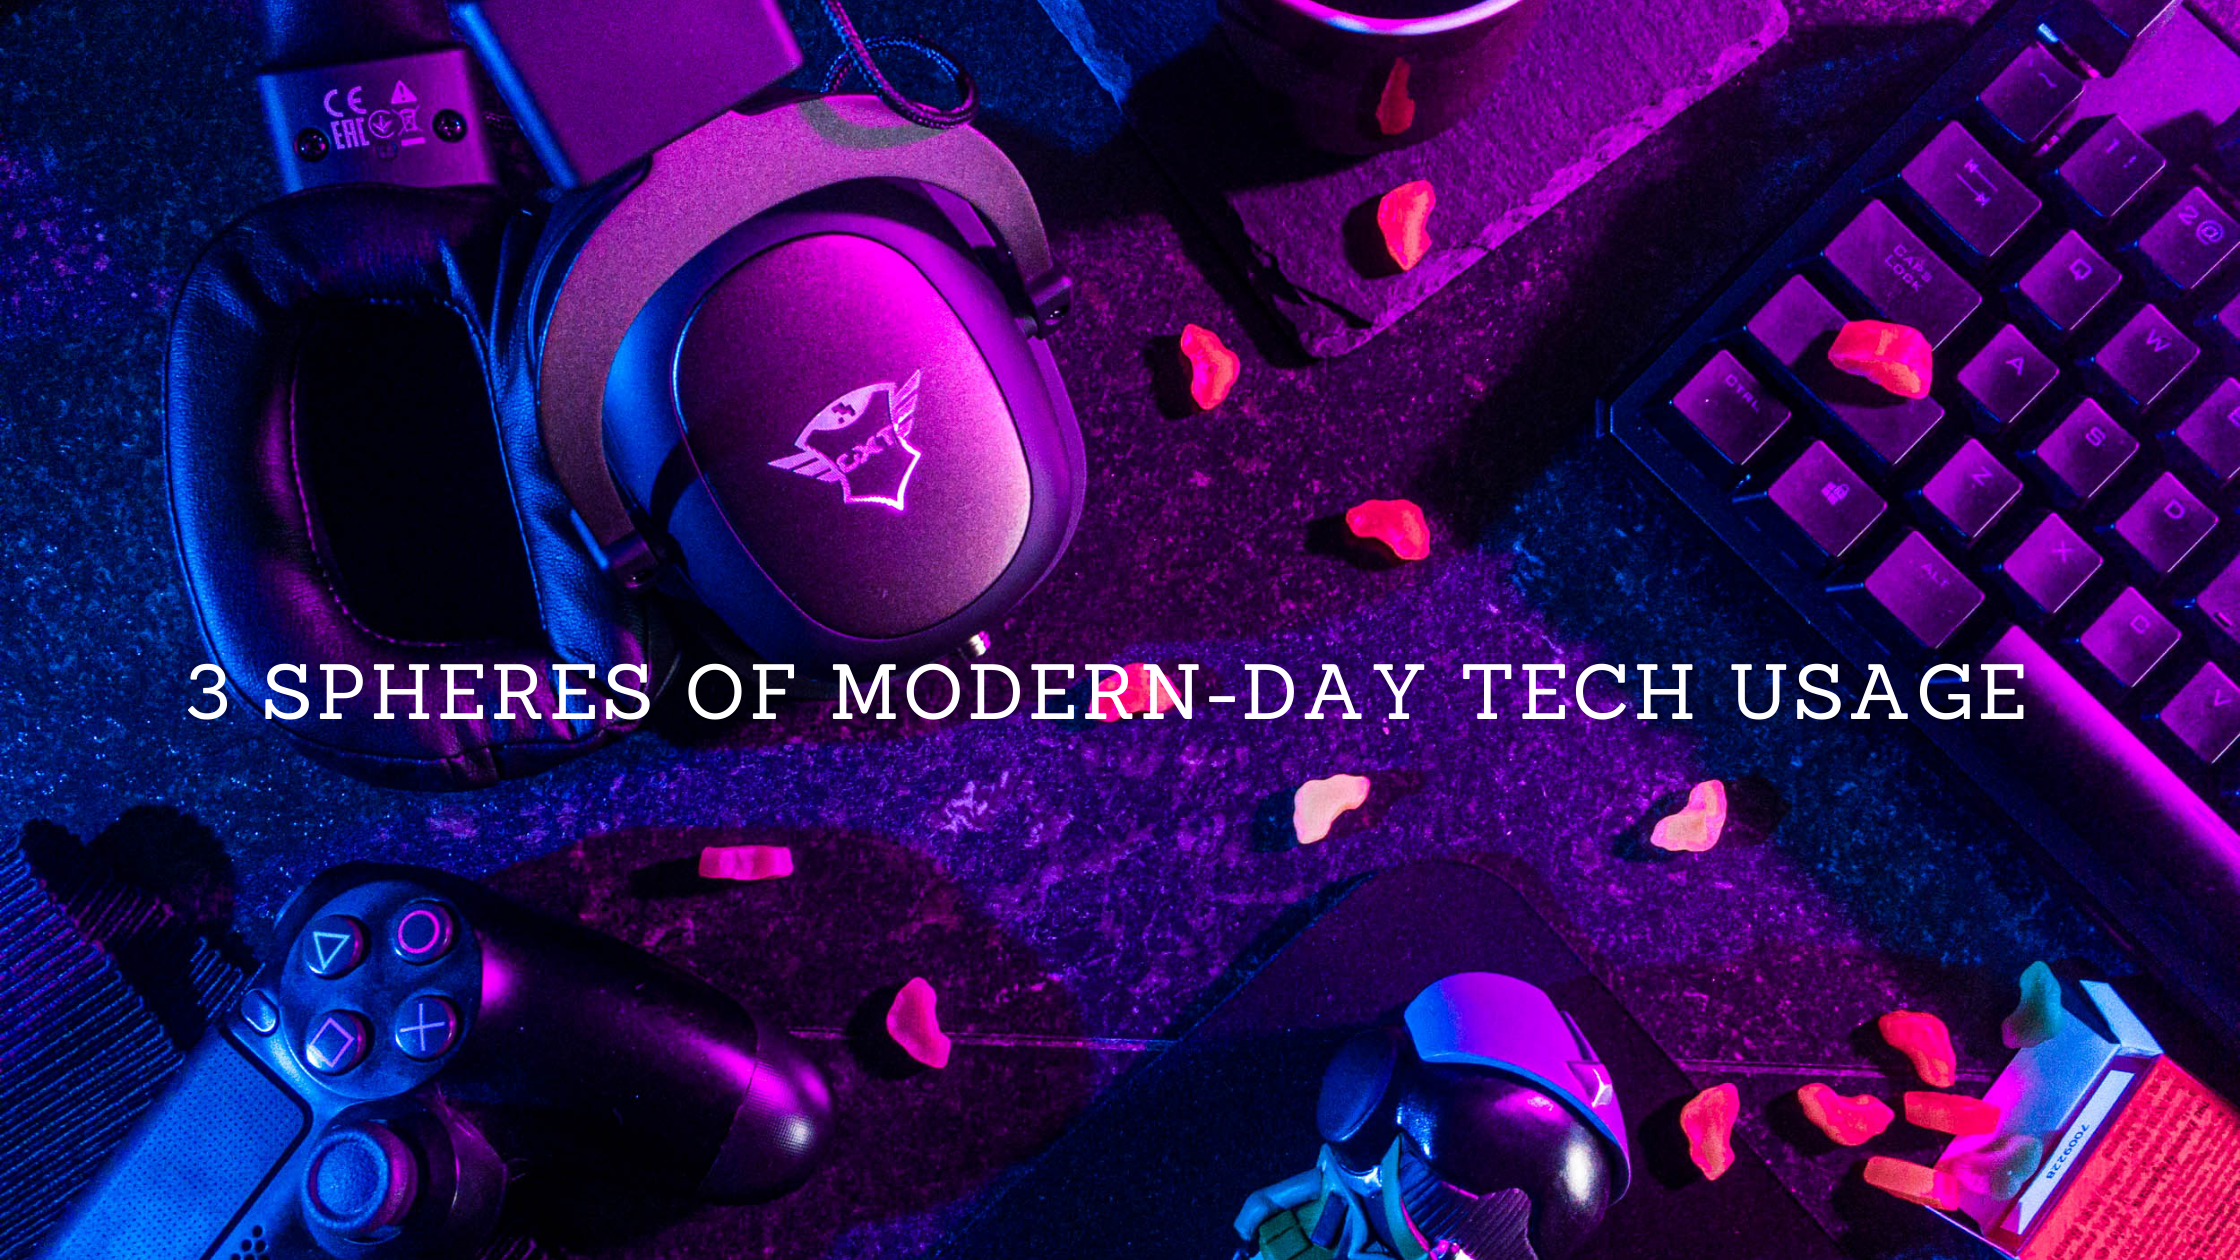 3 Spheres of Modern-day Tech Usage